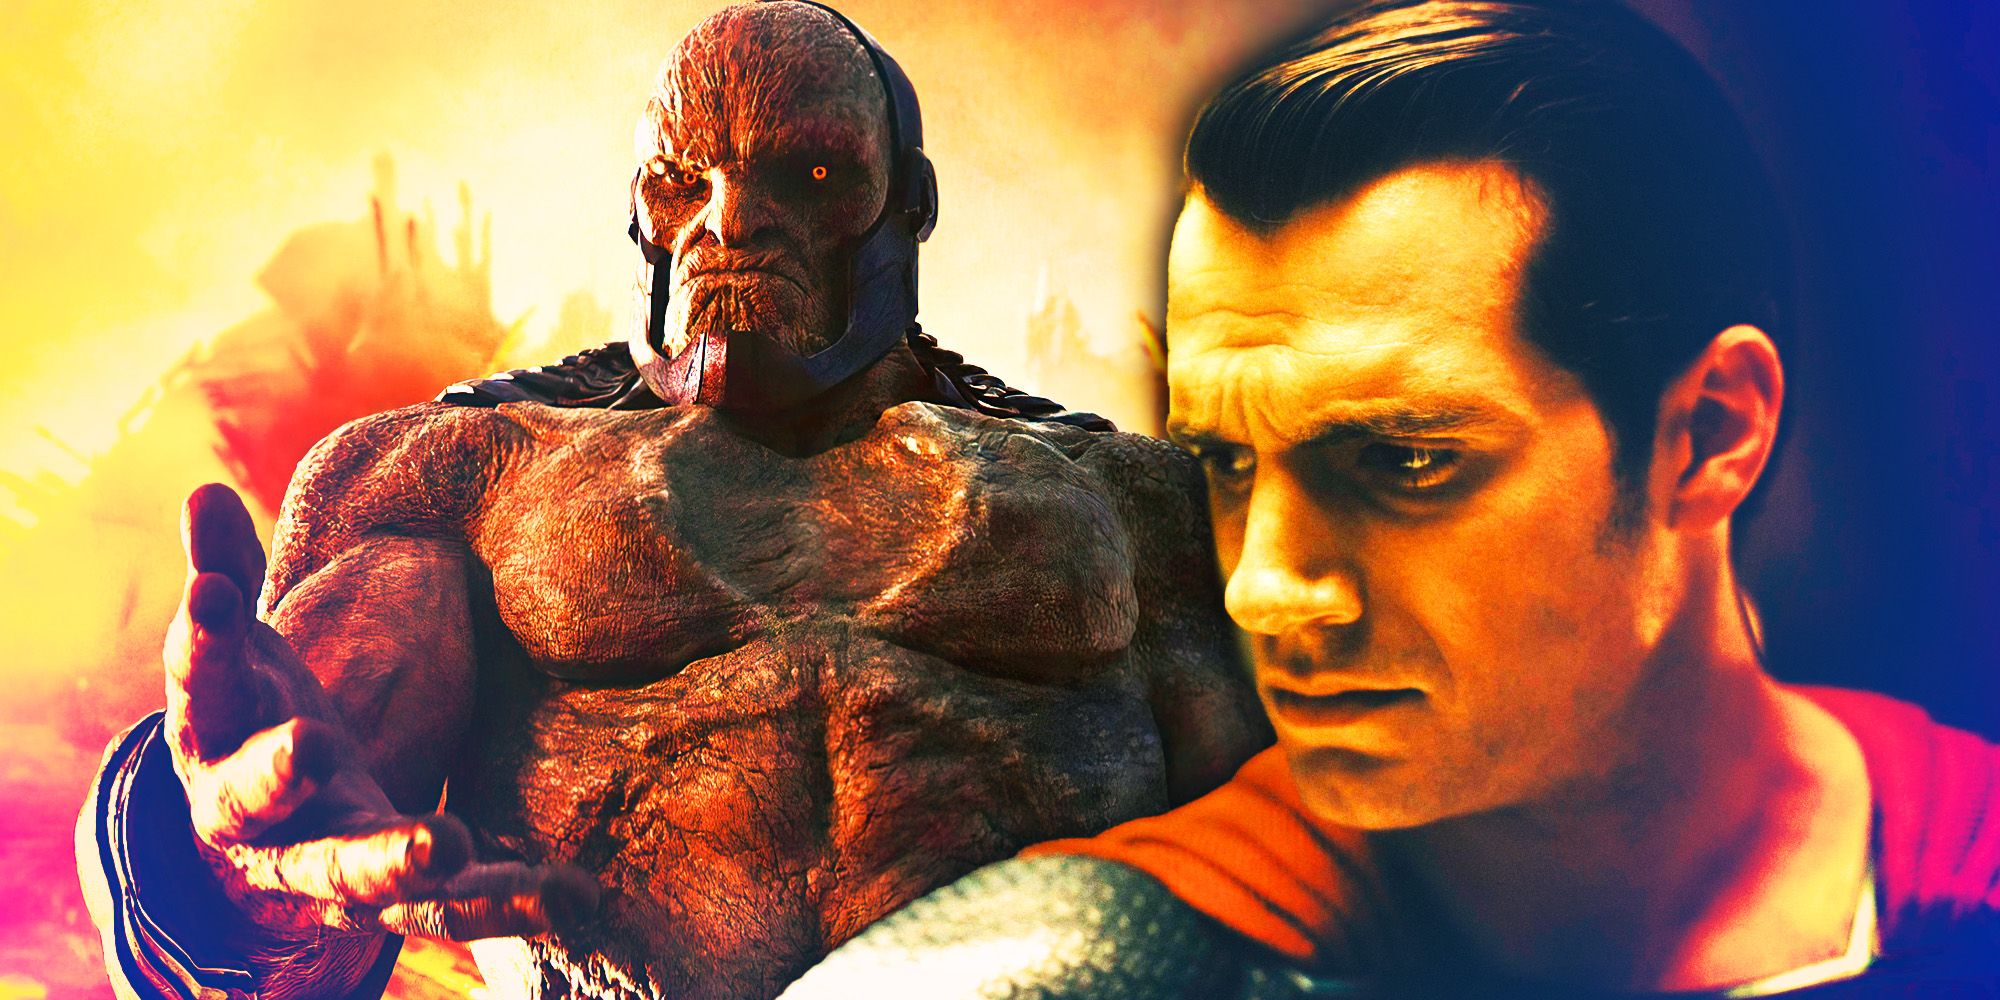 Darkseid and Henry Cavill's Superman from Zack Snyder Justice League